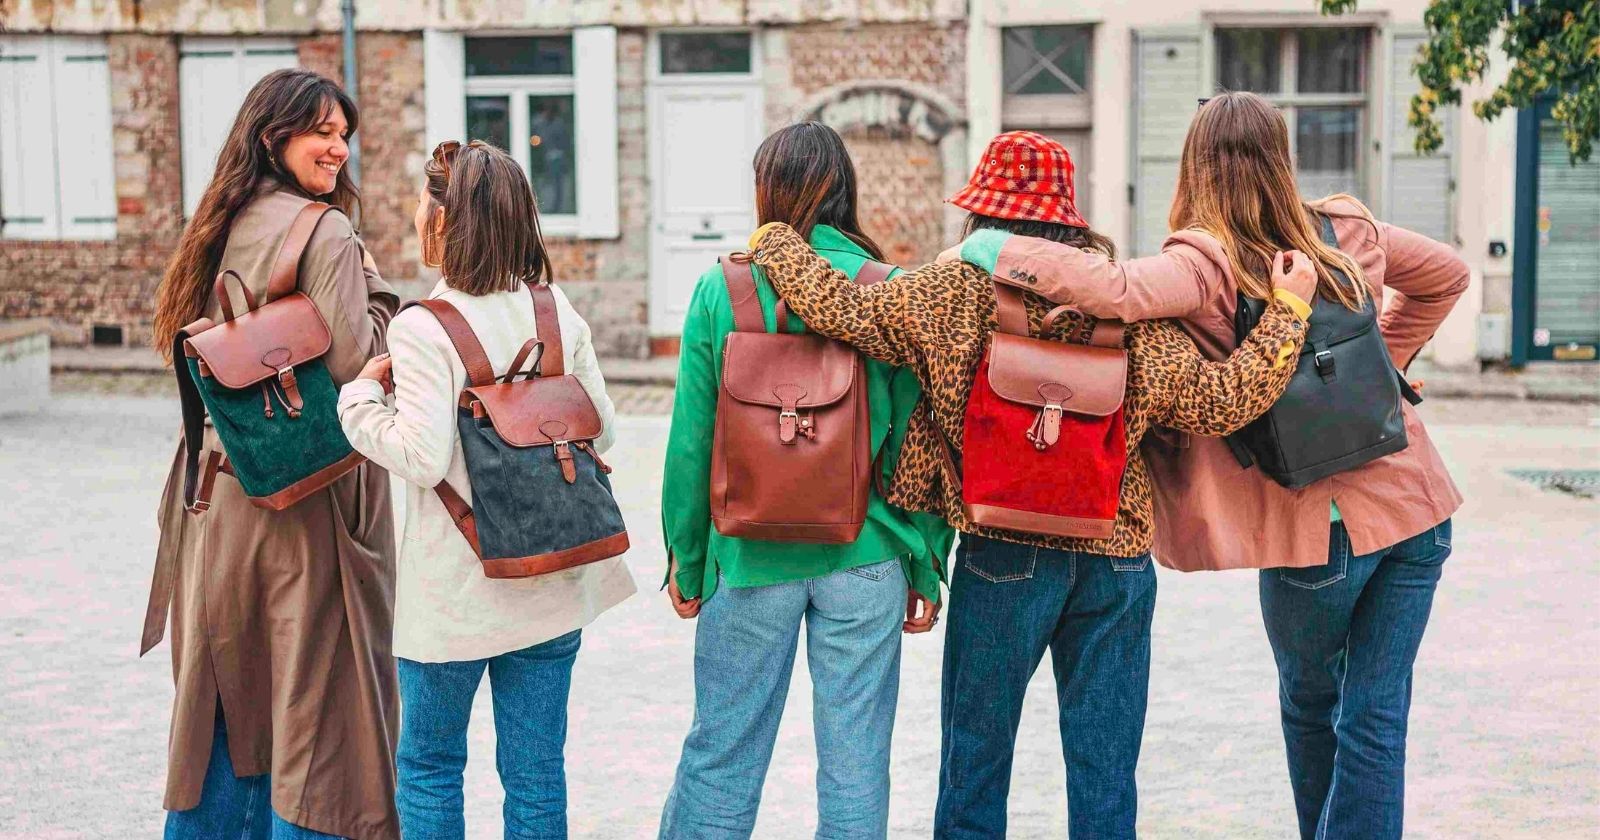 Ethical, artisanal and resistant: discover LEO, the new urban backpack from Pachamama